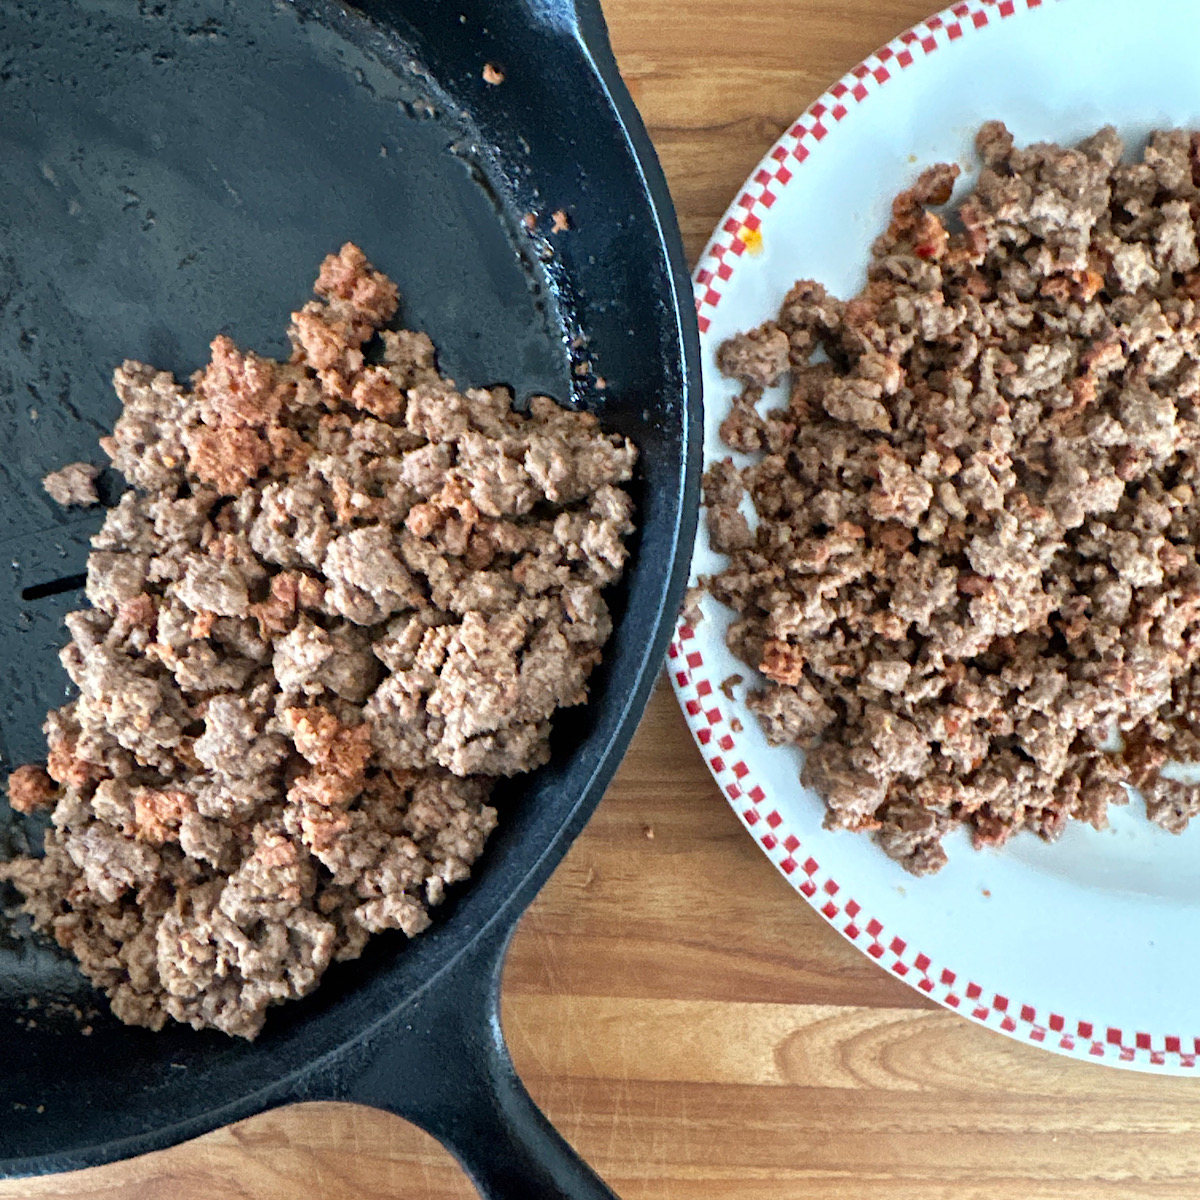 Chorizo and ground beef cooked in skillet and then removed to white plate.